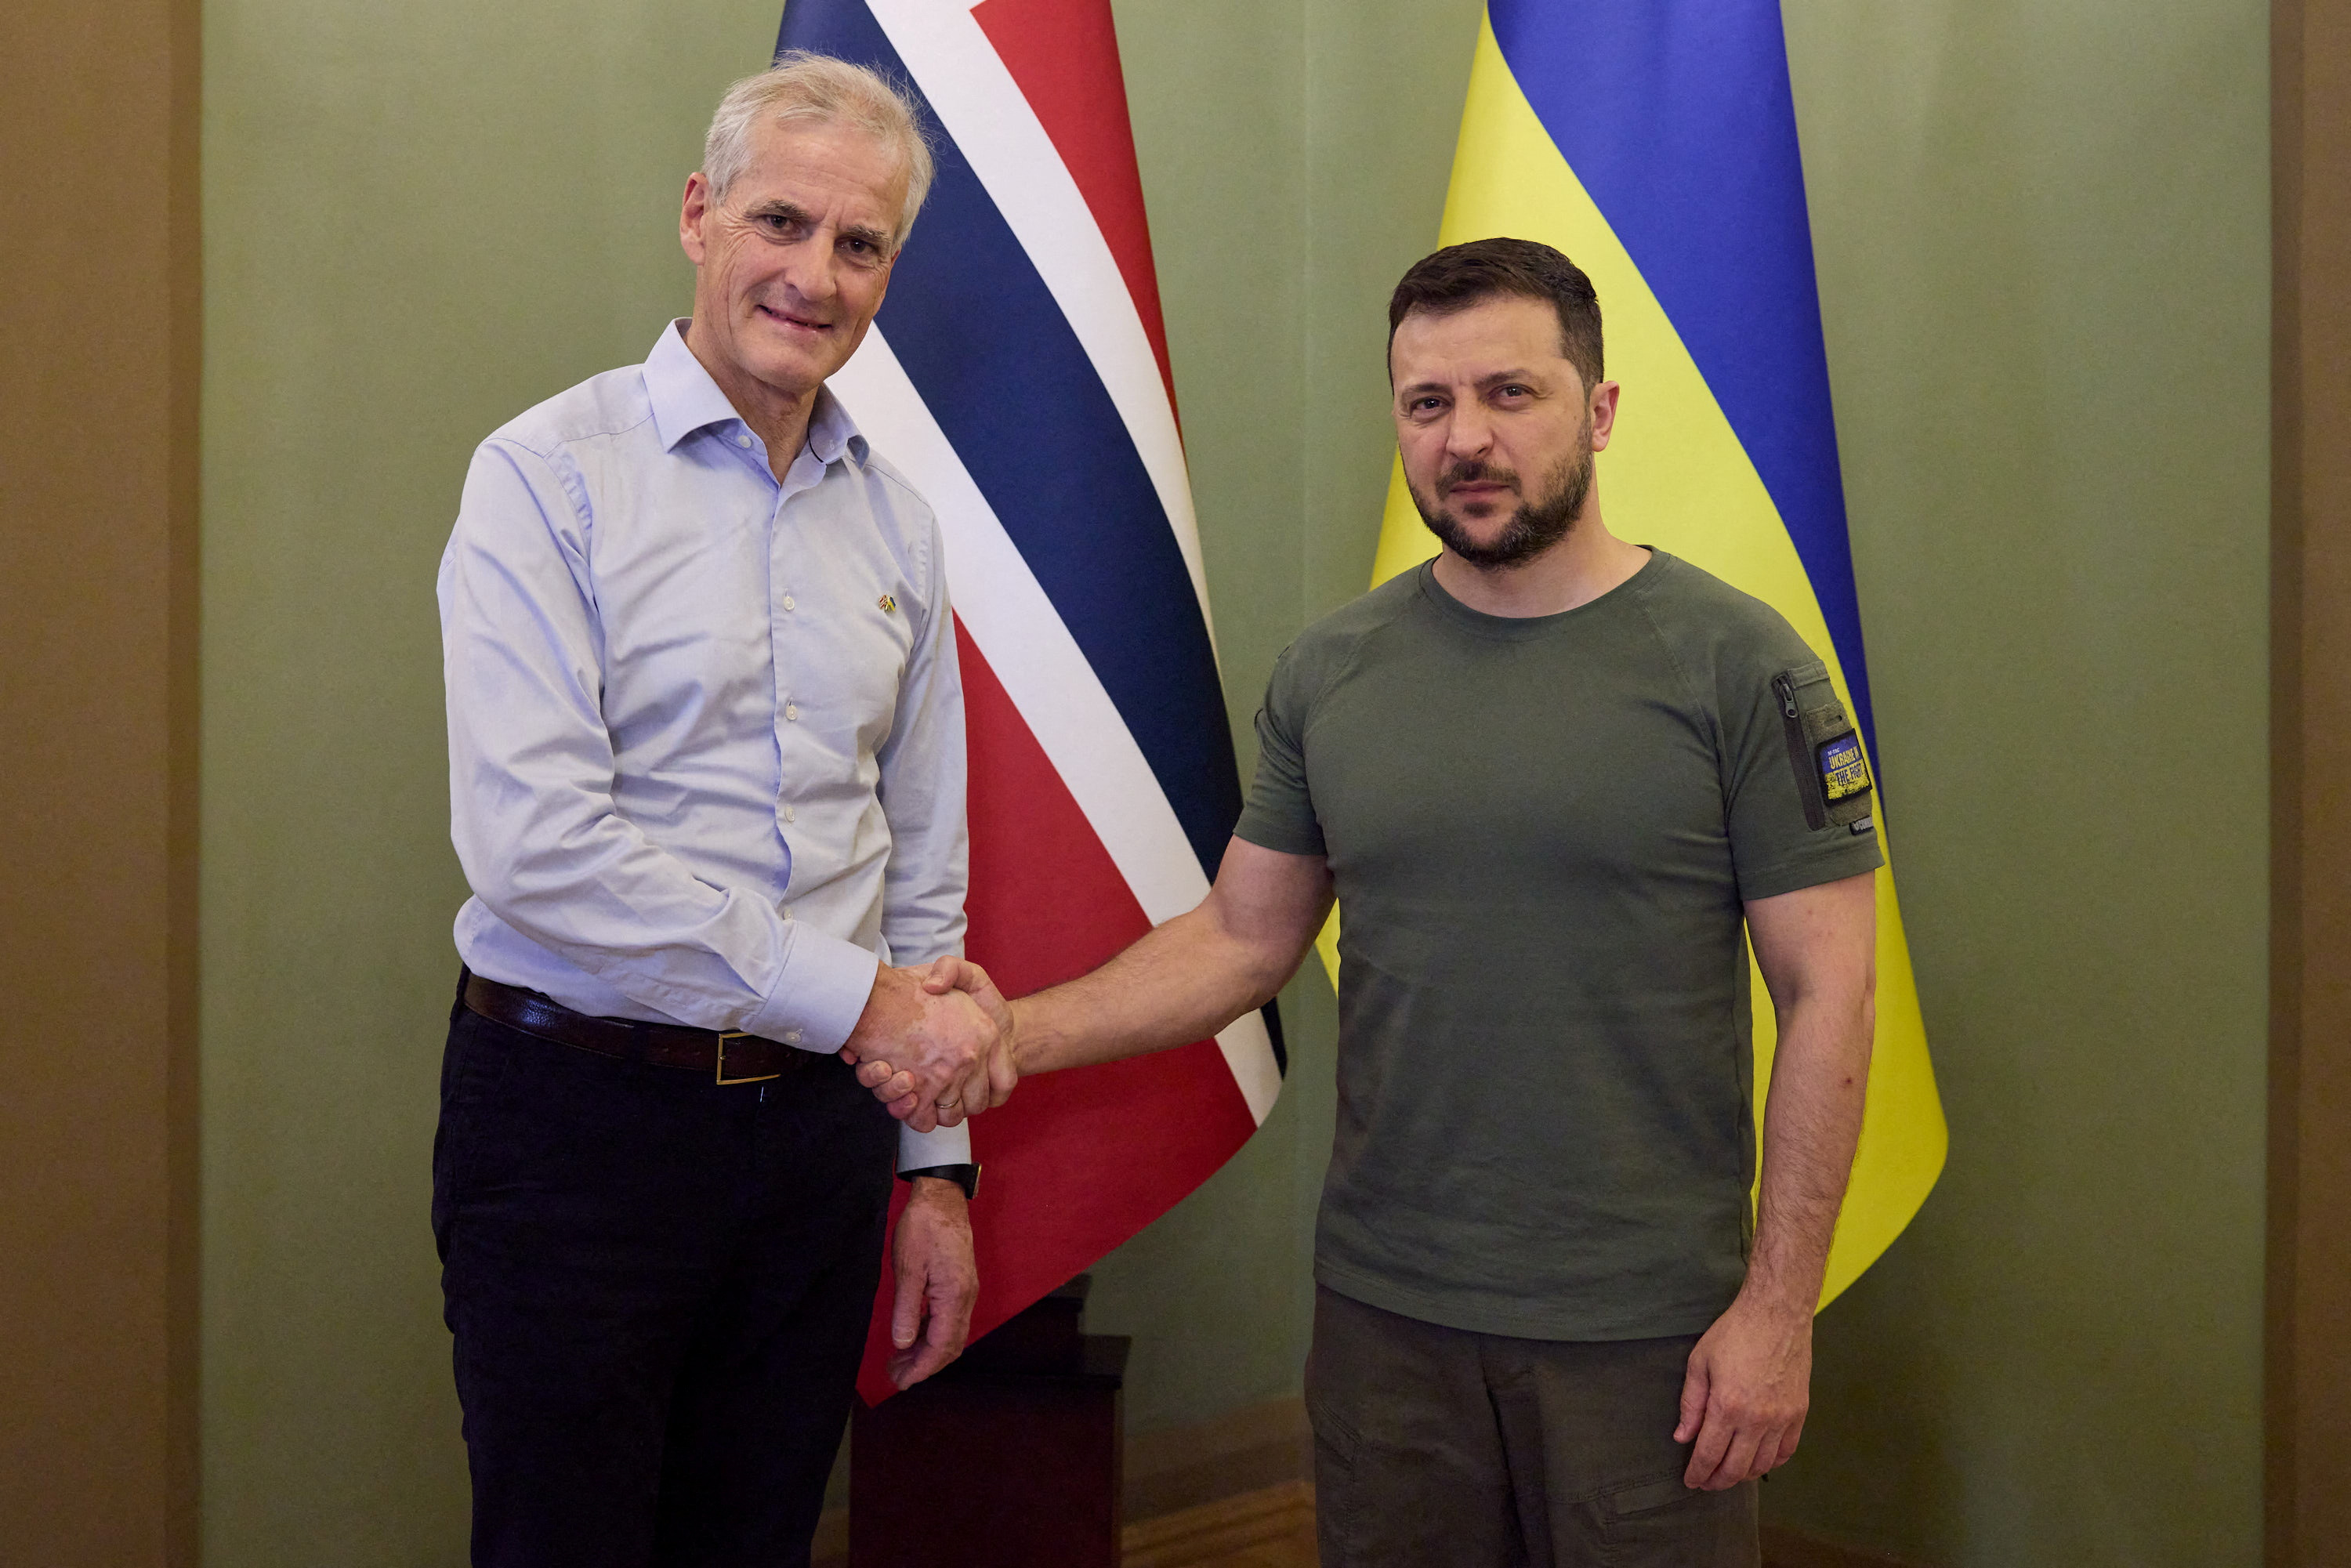 Norway's Prime Minister Stoere and Ukraine's President Zelenskiy shake hands before a meeting in Kyiv